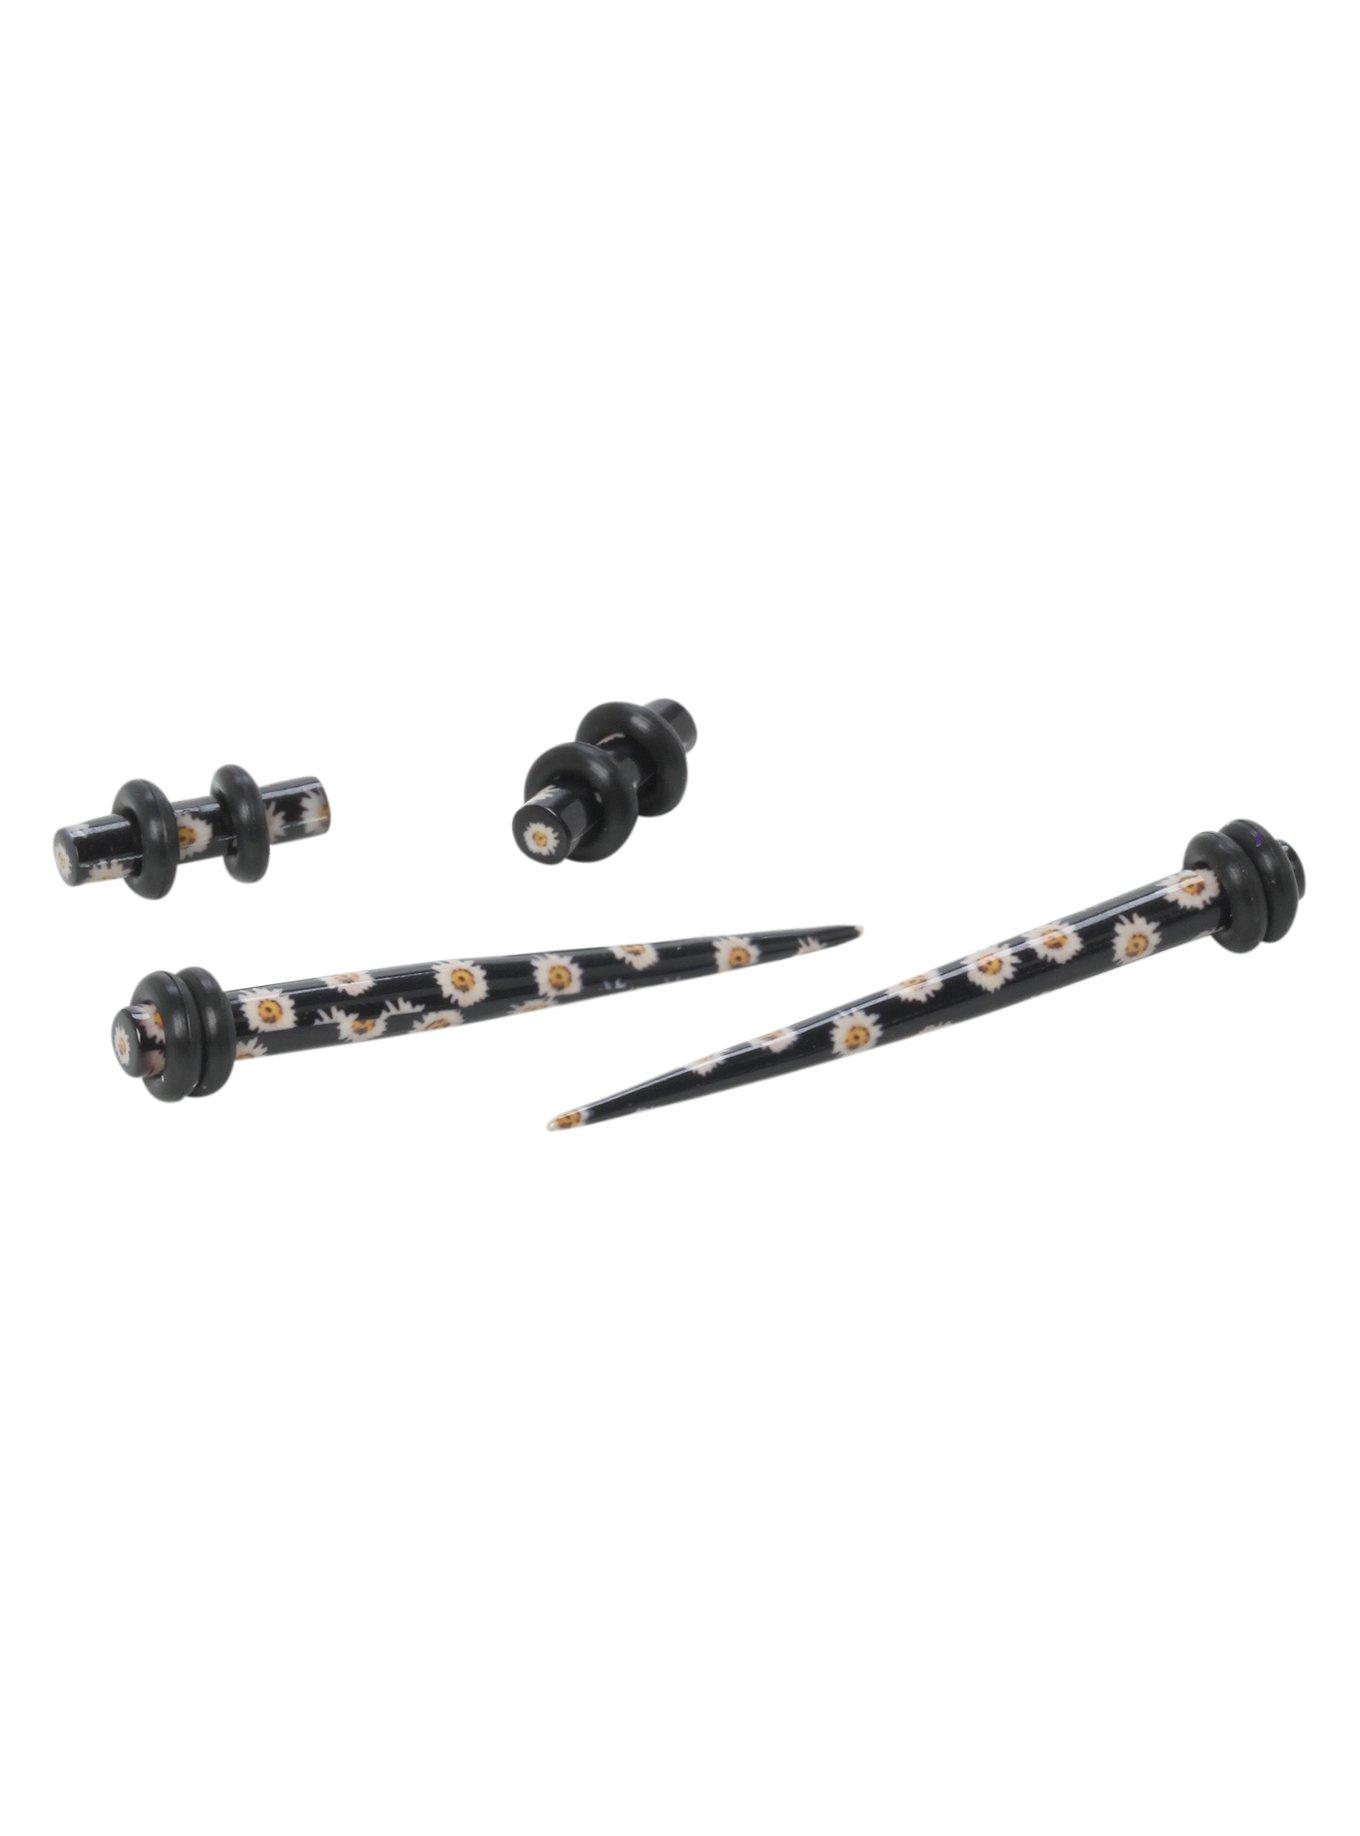 Acrylic Daisy Black Micro Taper And Plug 4 Pack, BLACK, hi-res